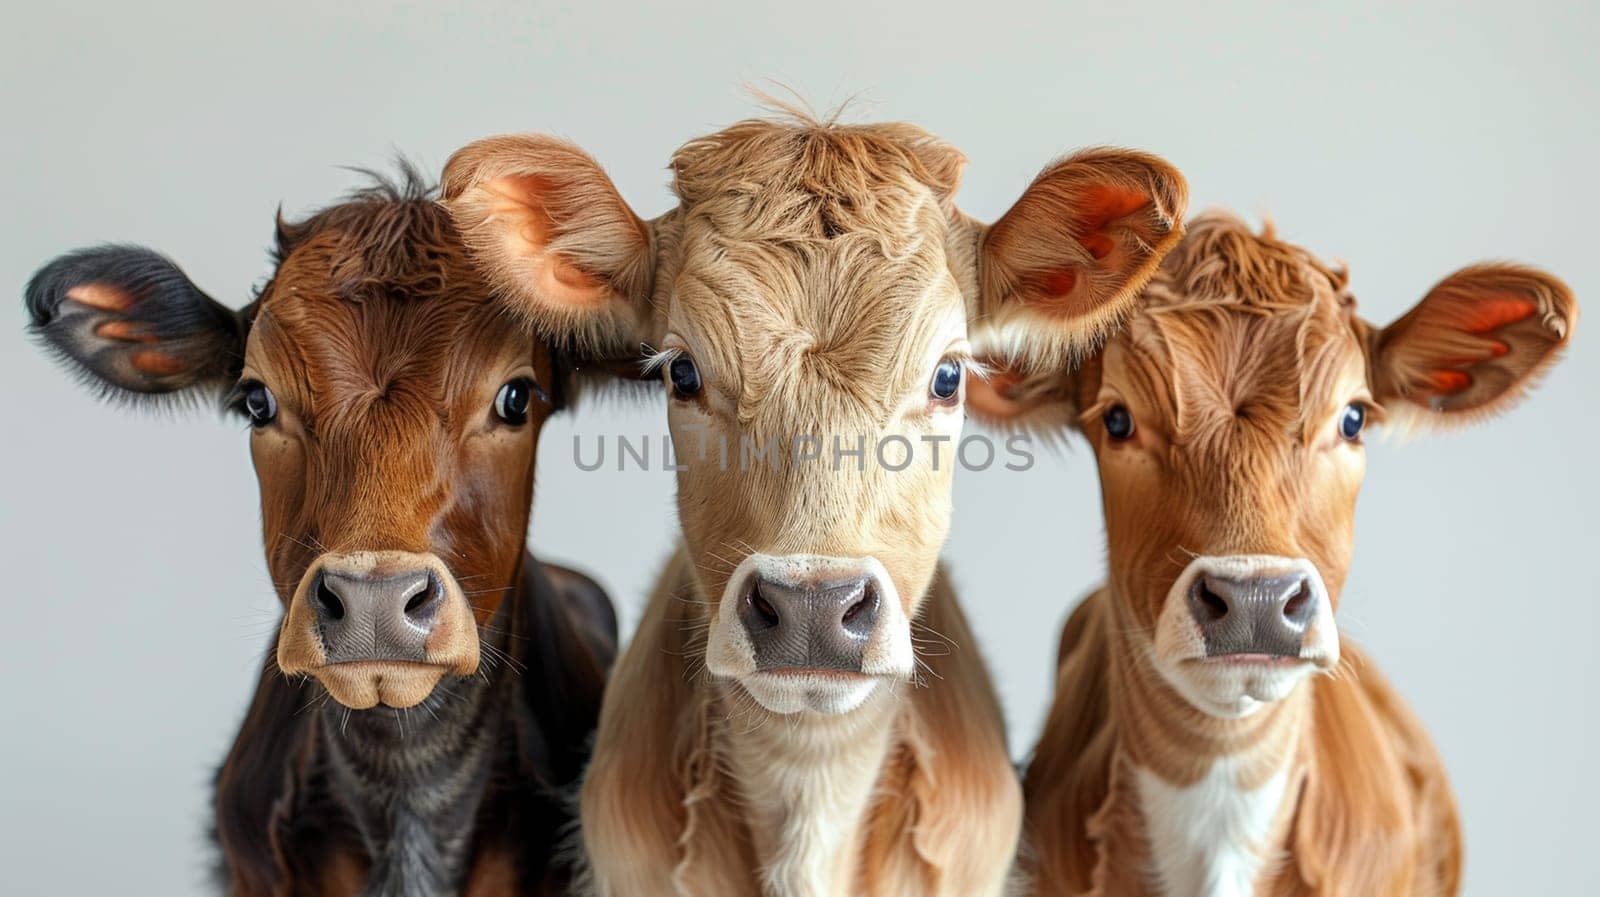 Three cows on a white background.